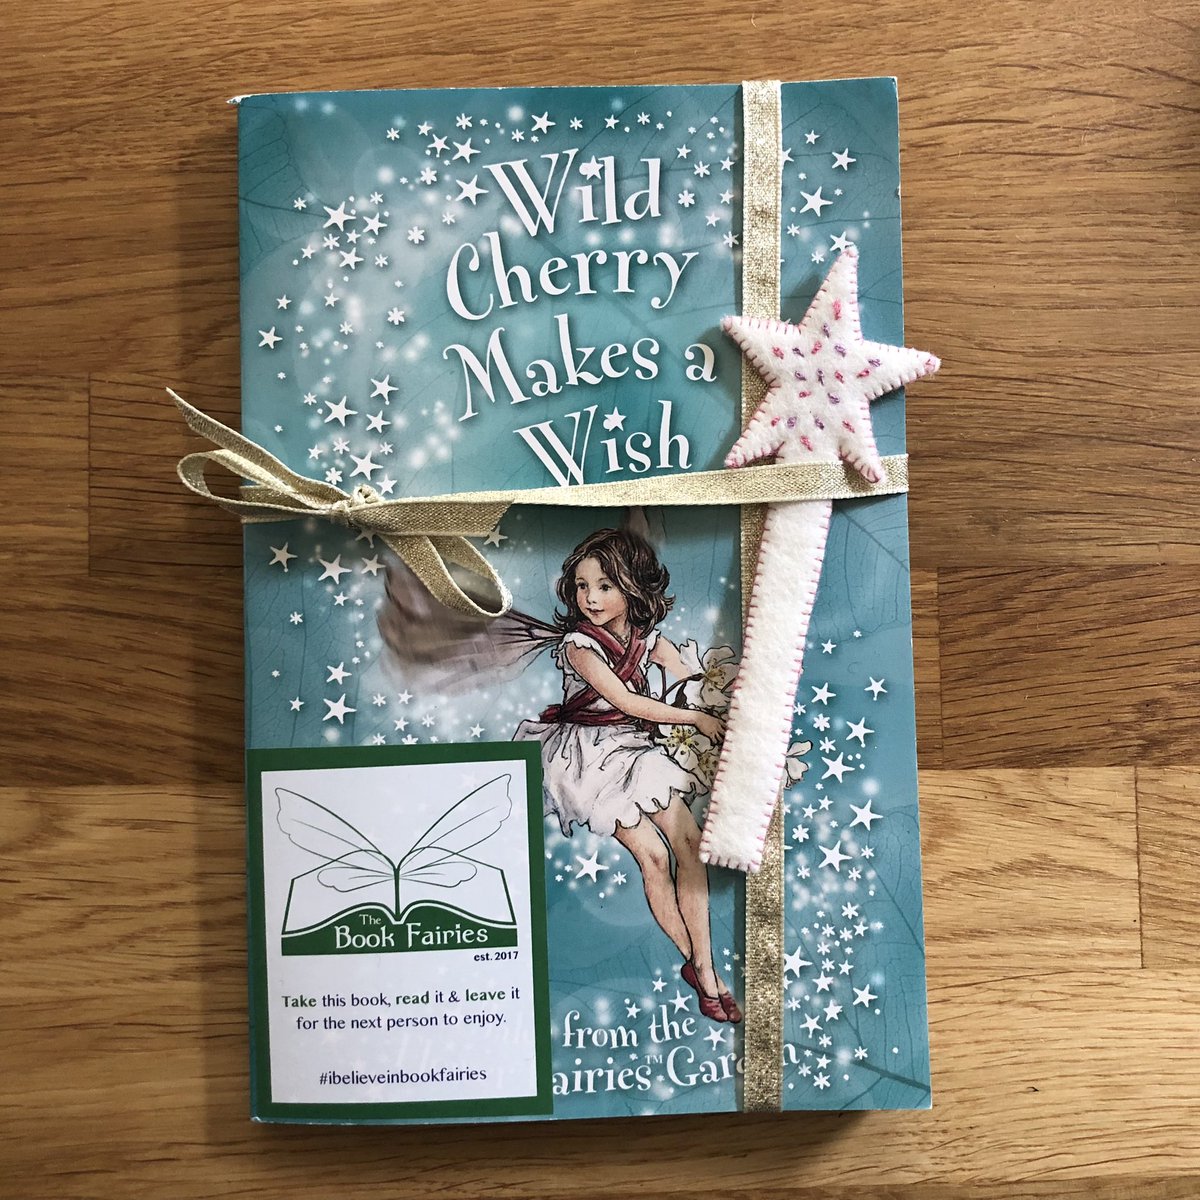 #bookfairyday #ibelieveinbookfaries 

Wild Cherry Makes a Wish
Hidden in #towcesterwatermeadow 

About the book:

Wild Cherry is a shy Flower Fairy. But when the fabulous, extrovert Pansy comes to Fairyland Wild Cherry can't help feeling she would like to be more like her. 🧚‍♀️📚